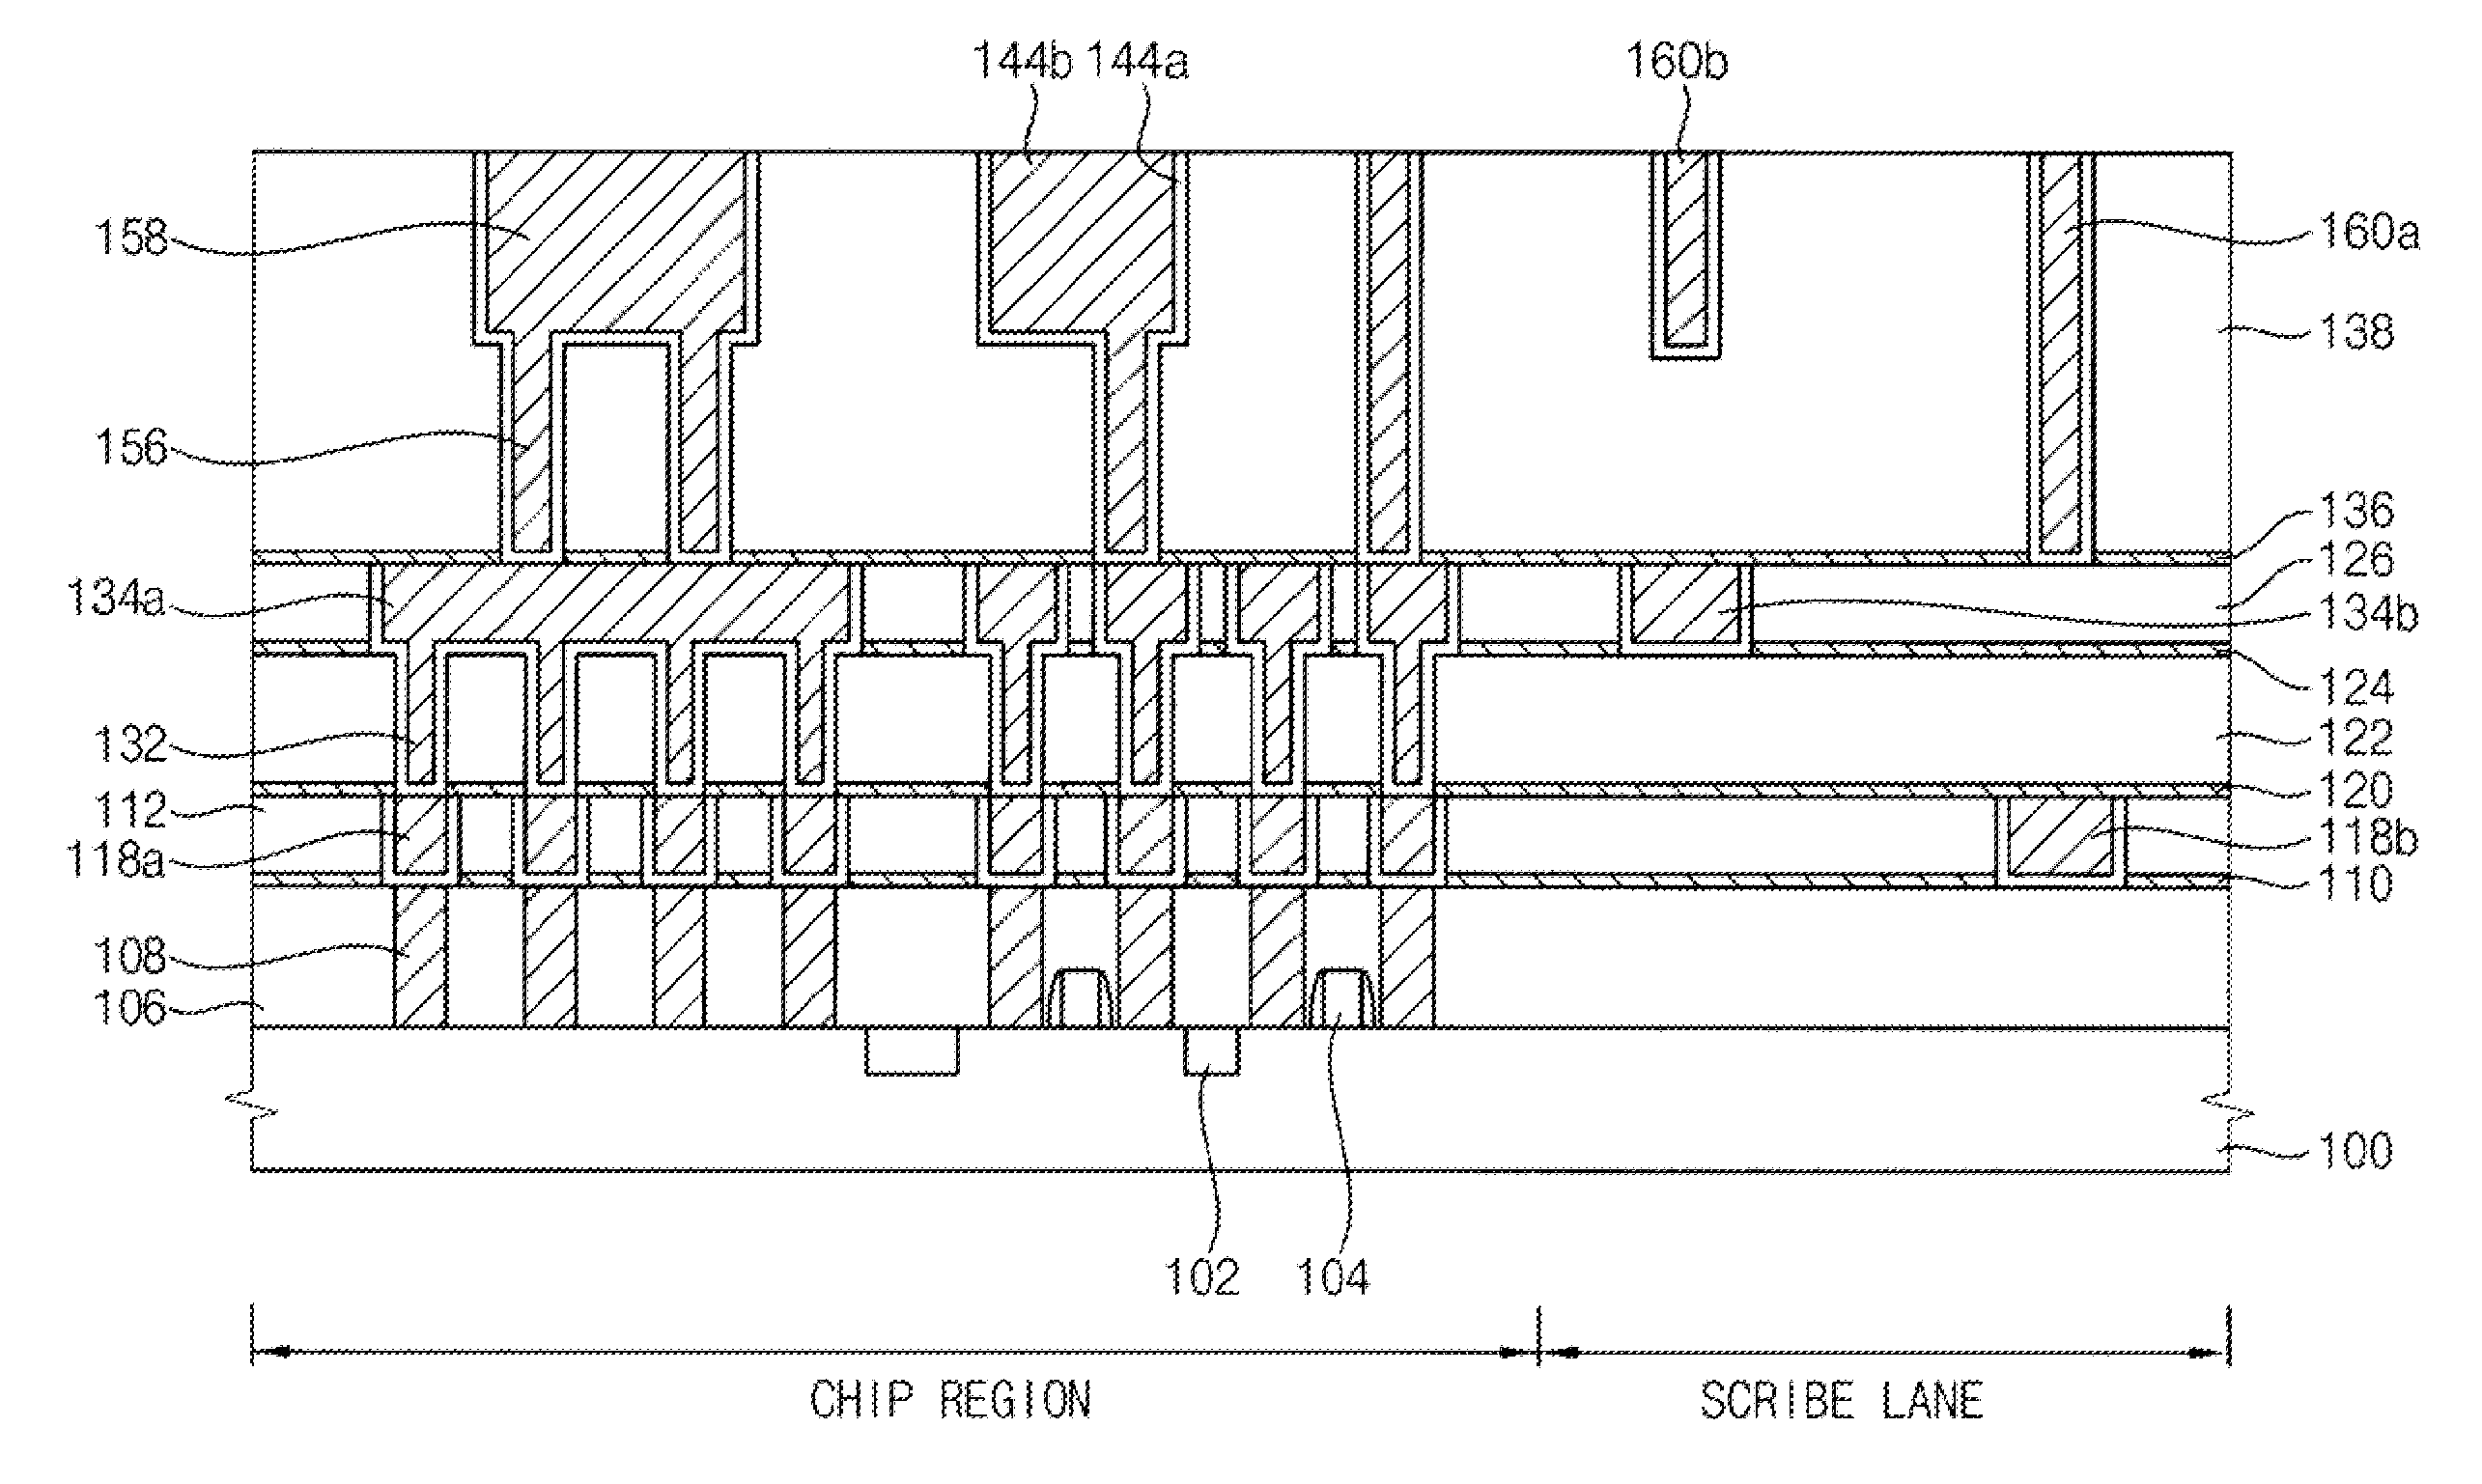 Monitoring test element groups (TEGS) for etching process and methods of manufacturing a semiconductor device using the same